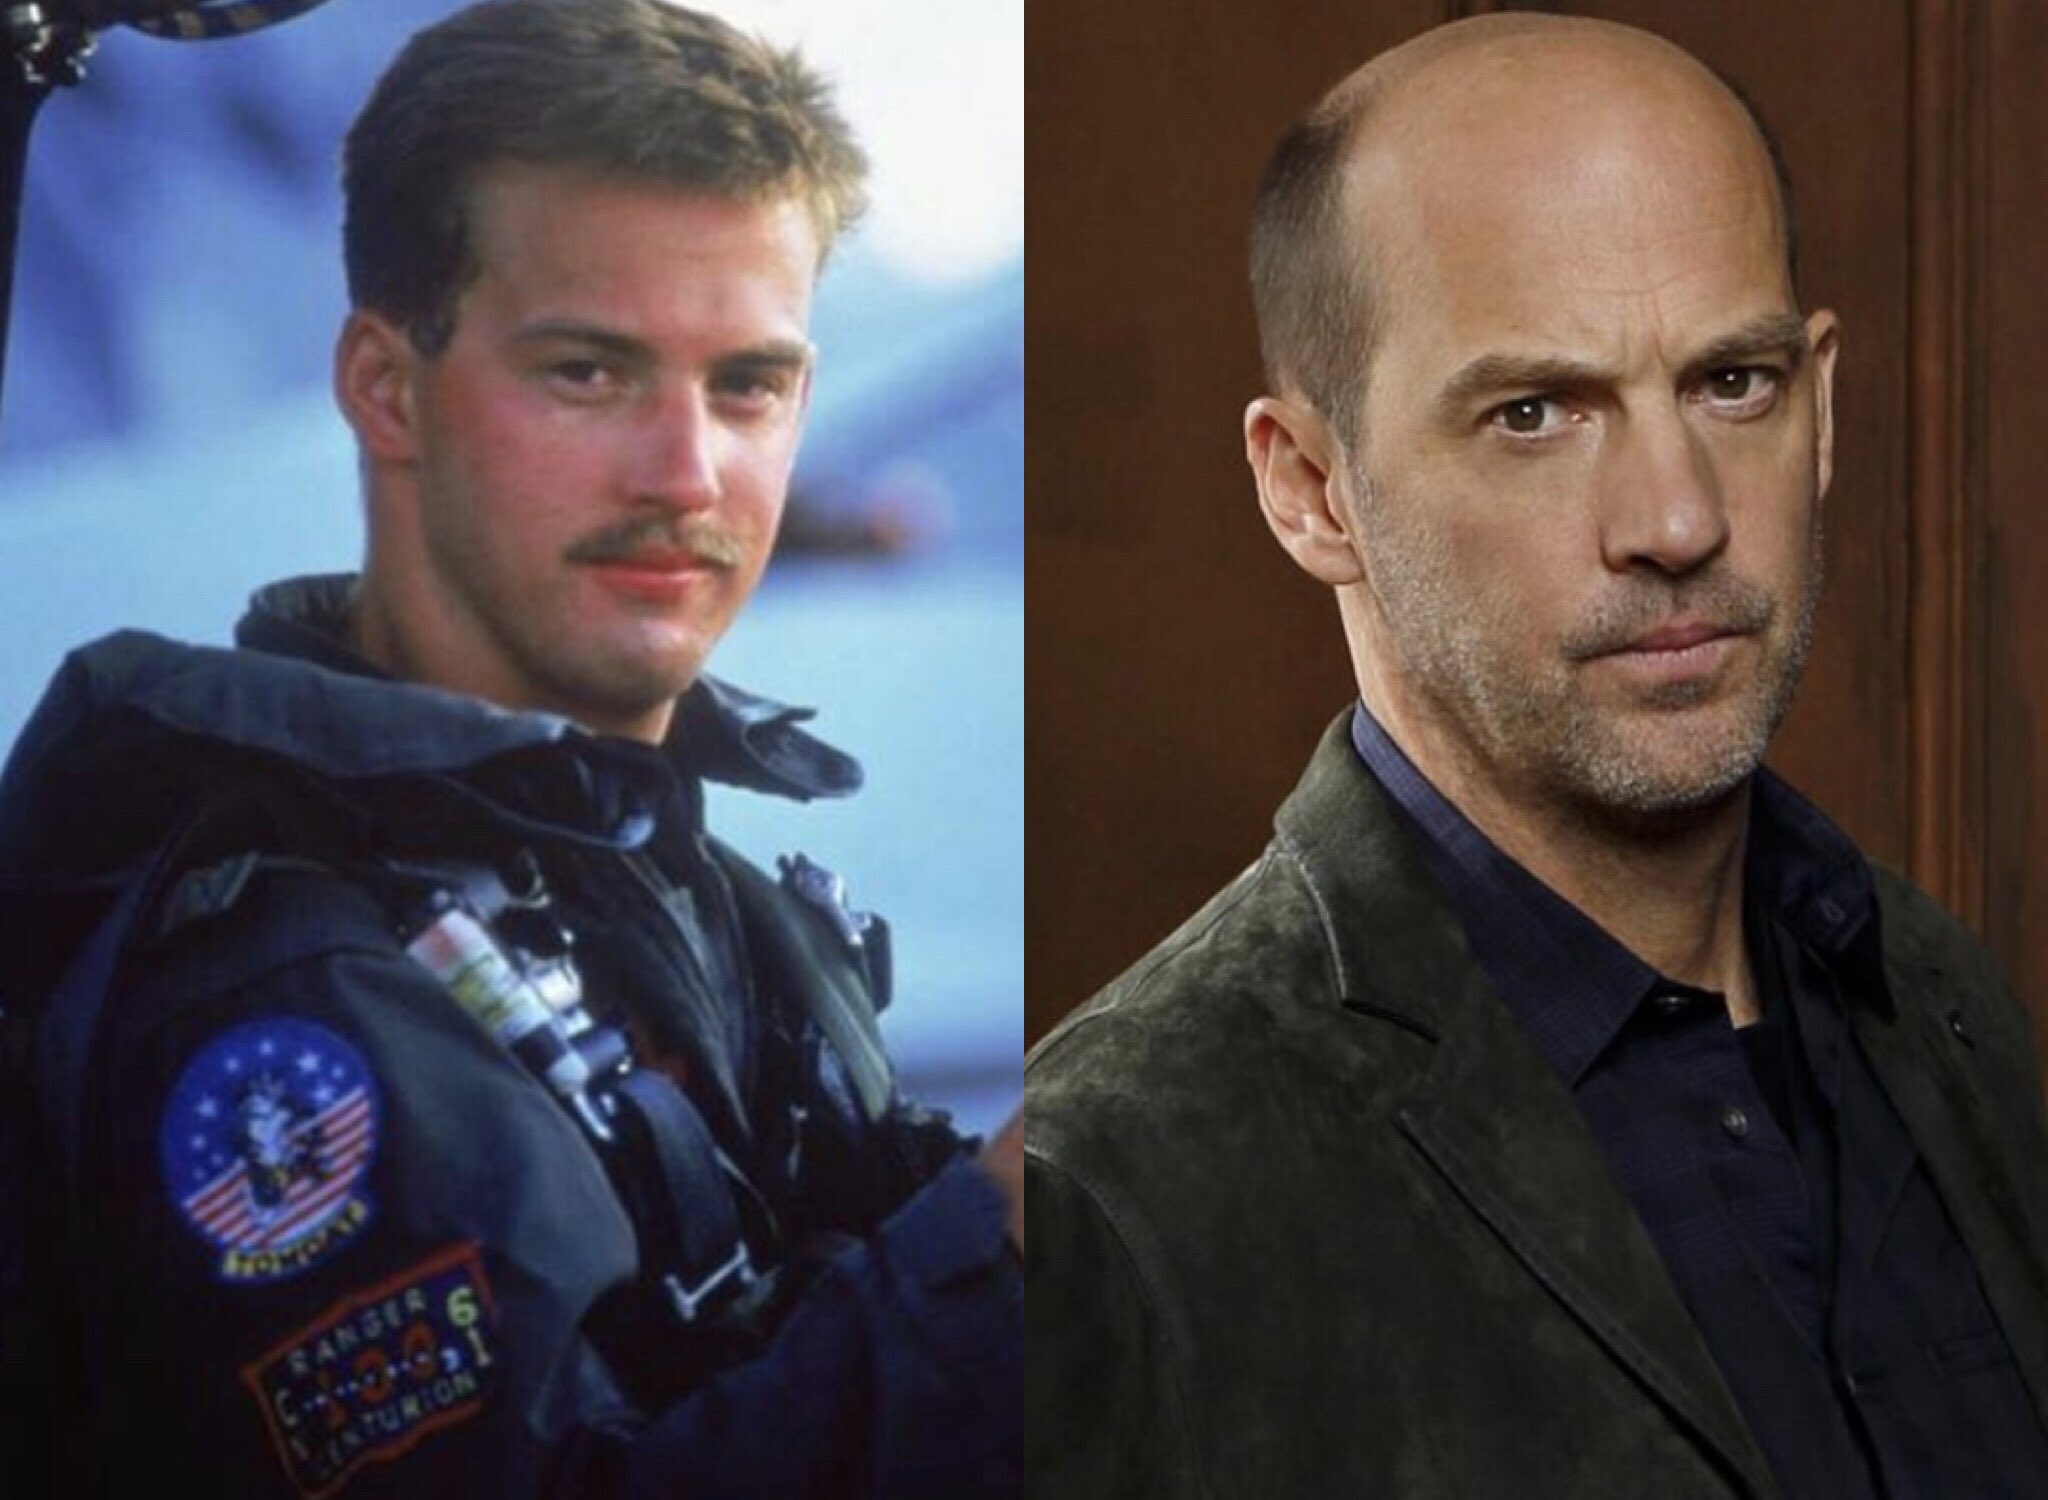 80sThen80sNow on Twitter: Happy 58th Birthday Anthony Edwards! Born Anthony  Charles Edwards on July 19, 1962 in Santa Barbara, CA., this Actor Director  Appeared in Over 60 Movies & TV Shows Since